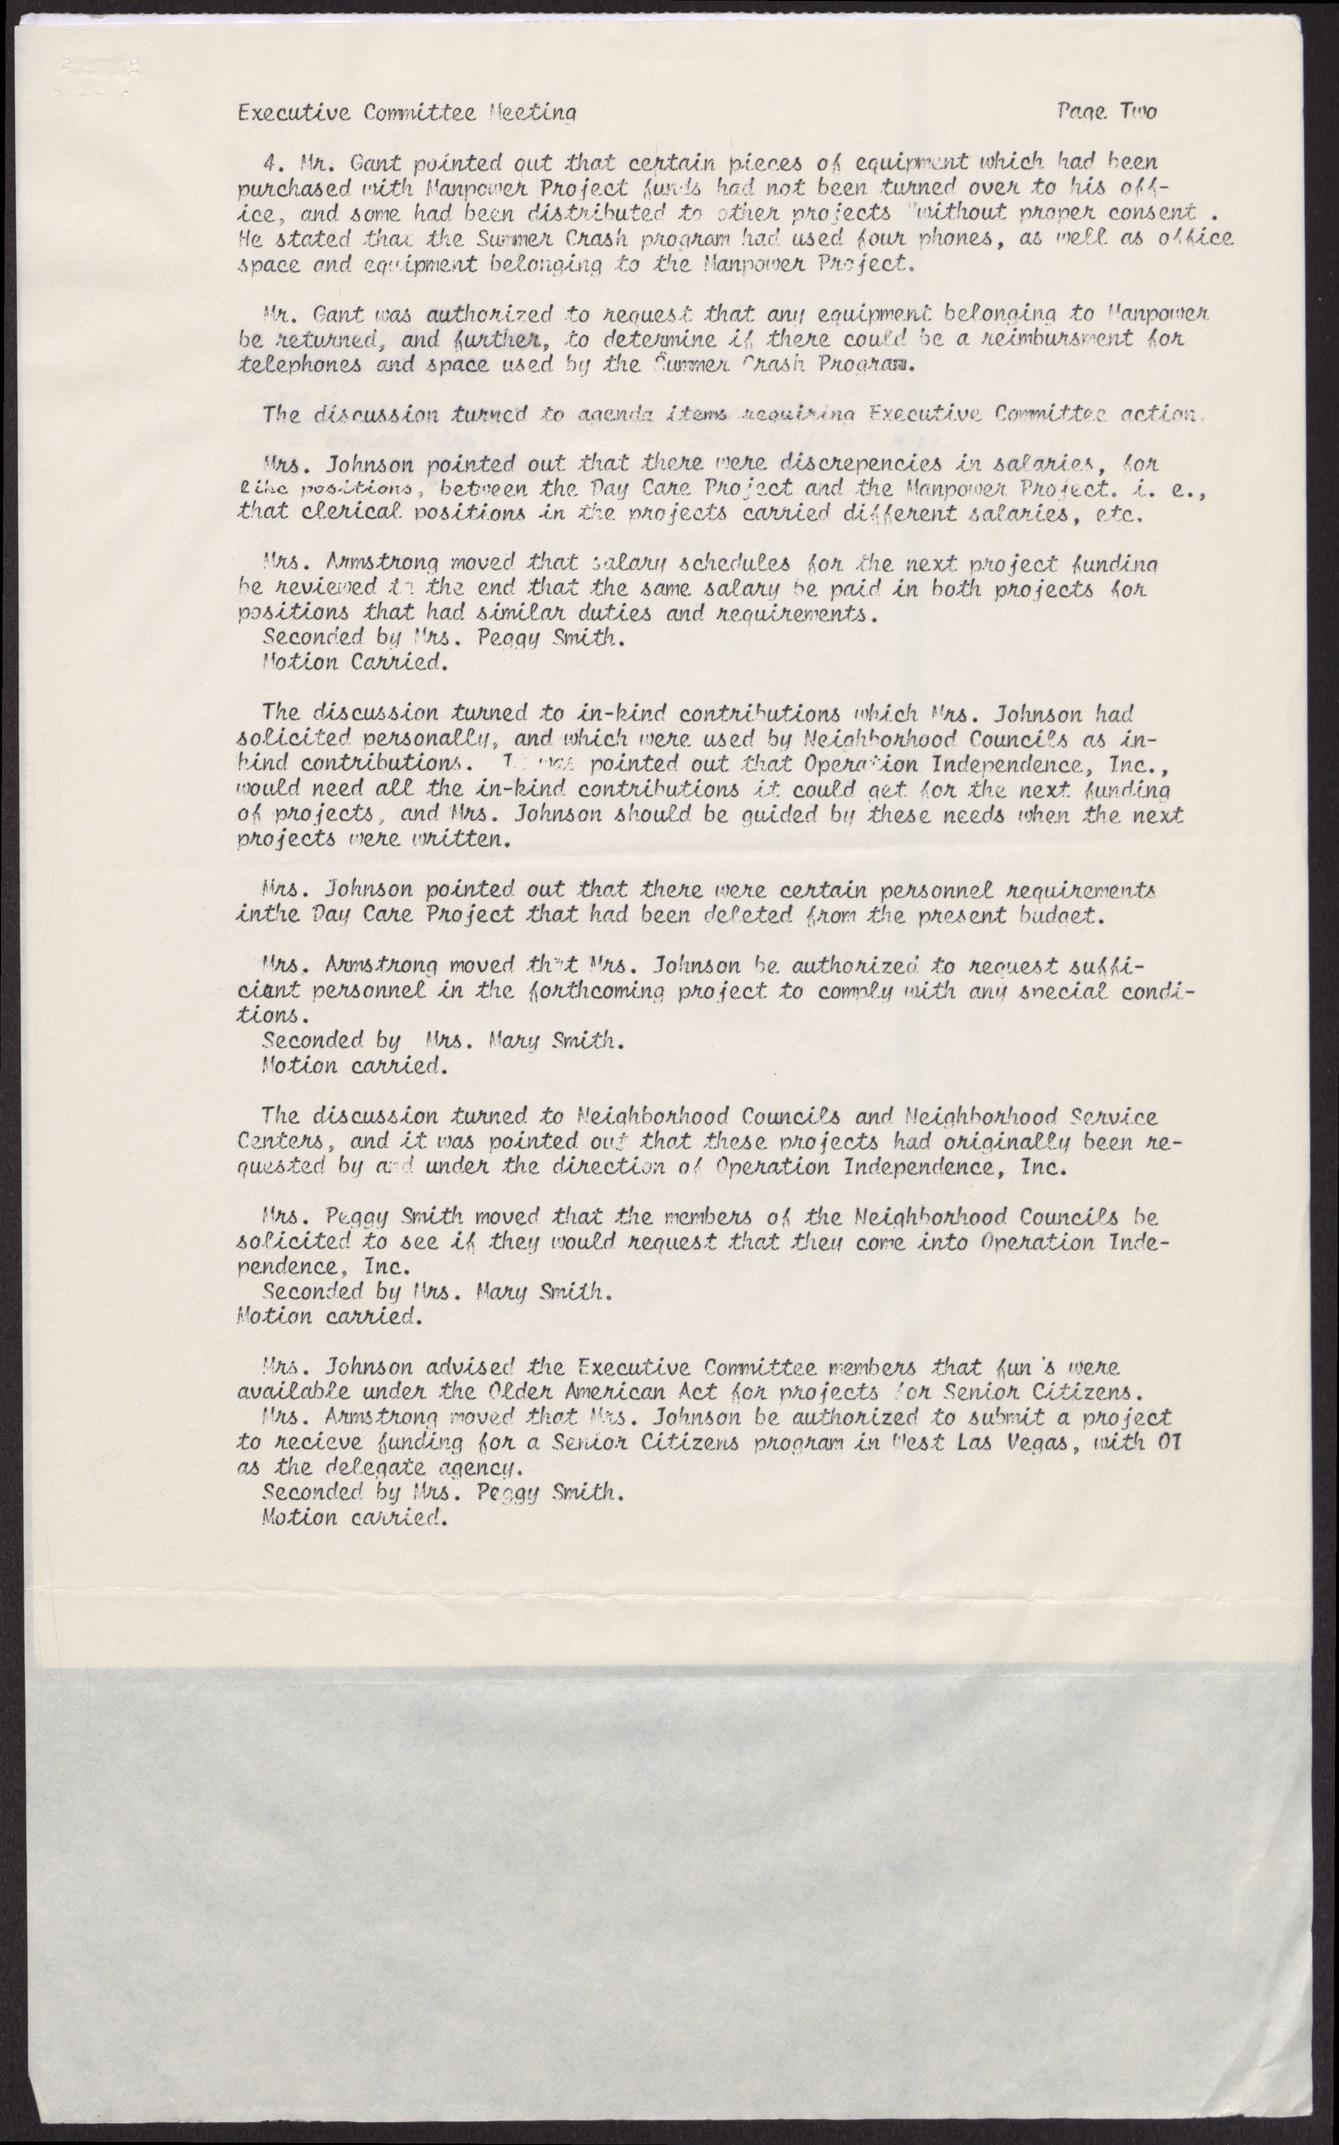 Minutes from an Operation Independence, Inc. Executive Committee Meeting (4 pages), August 16, 1967, page 3